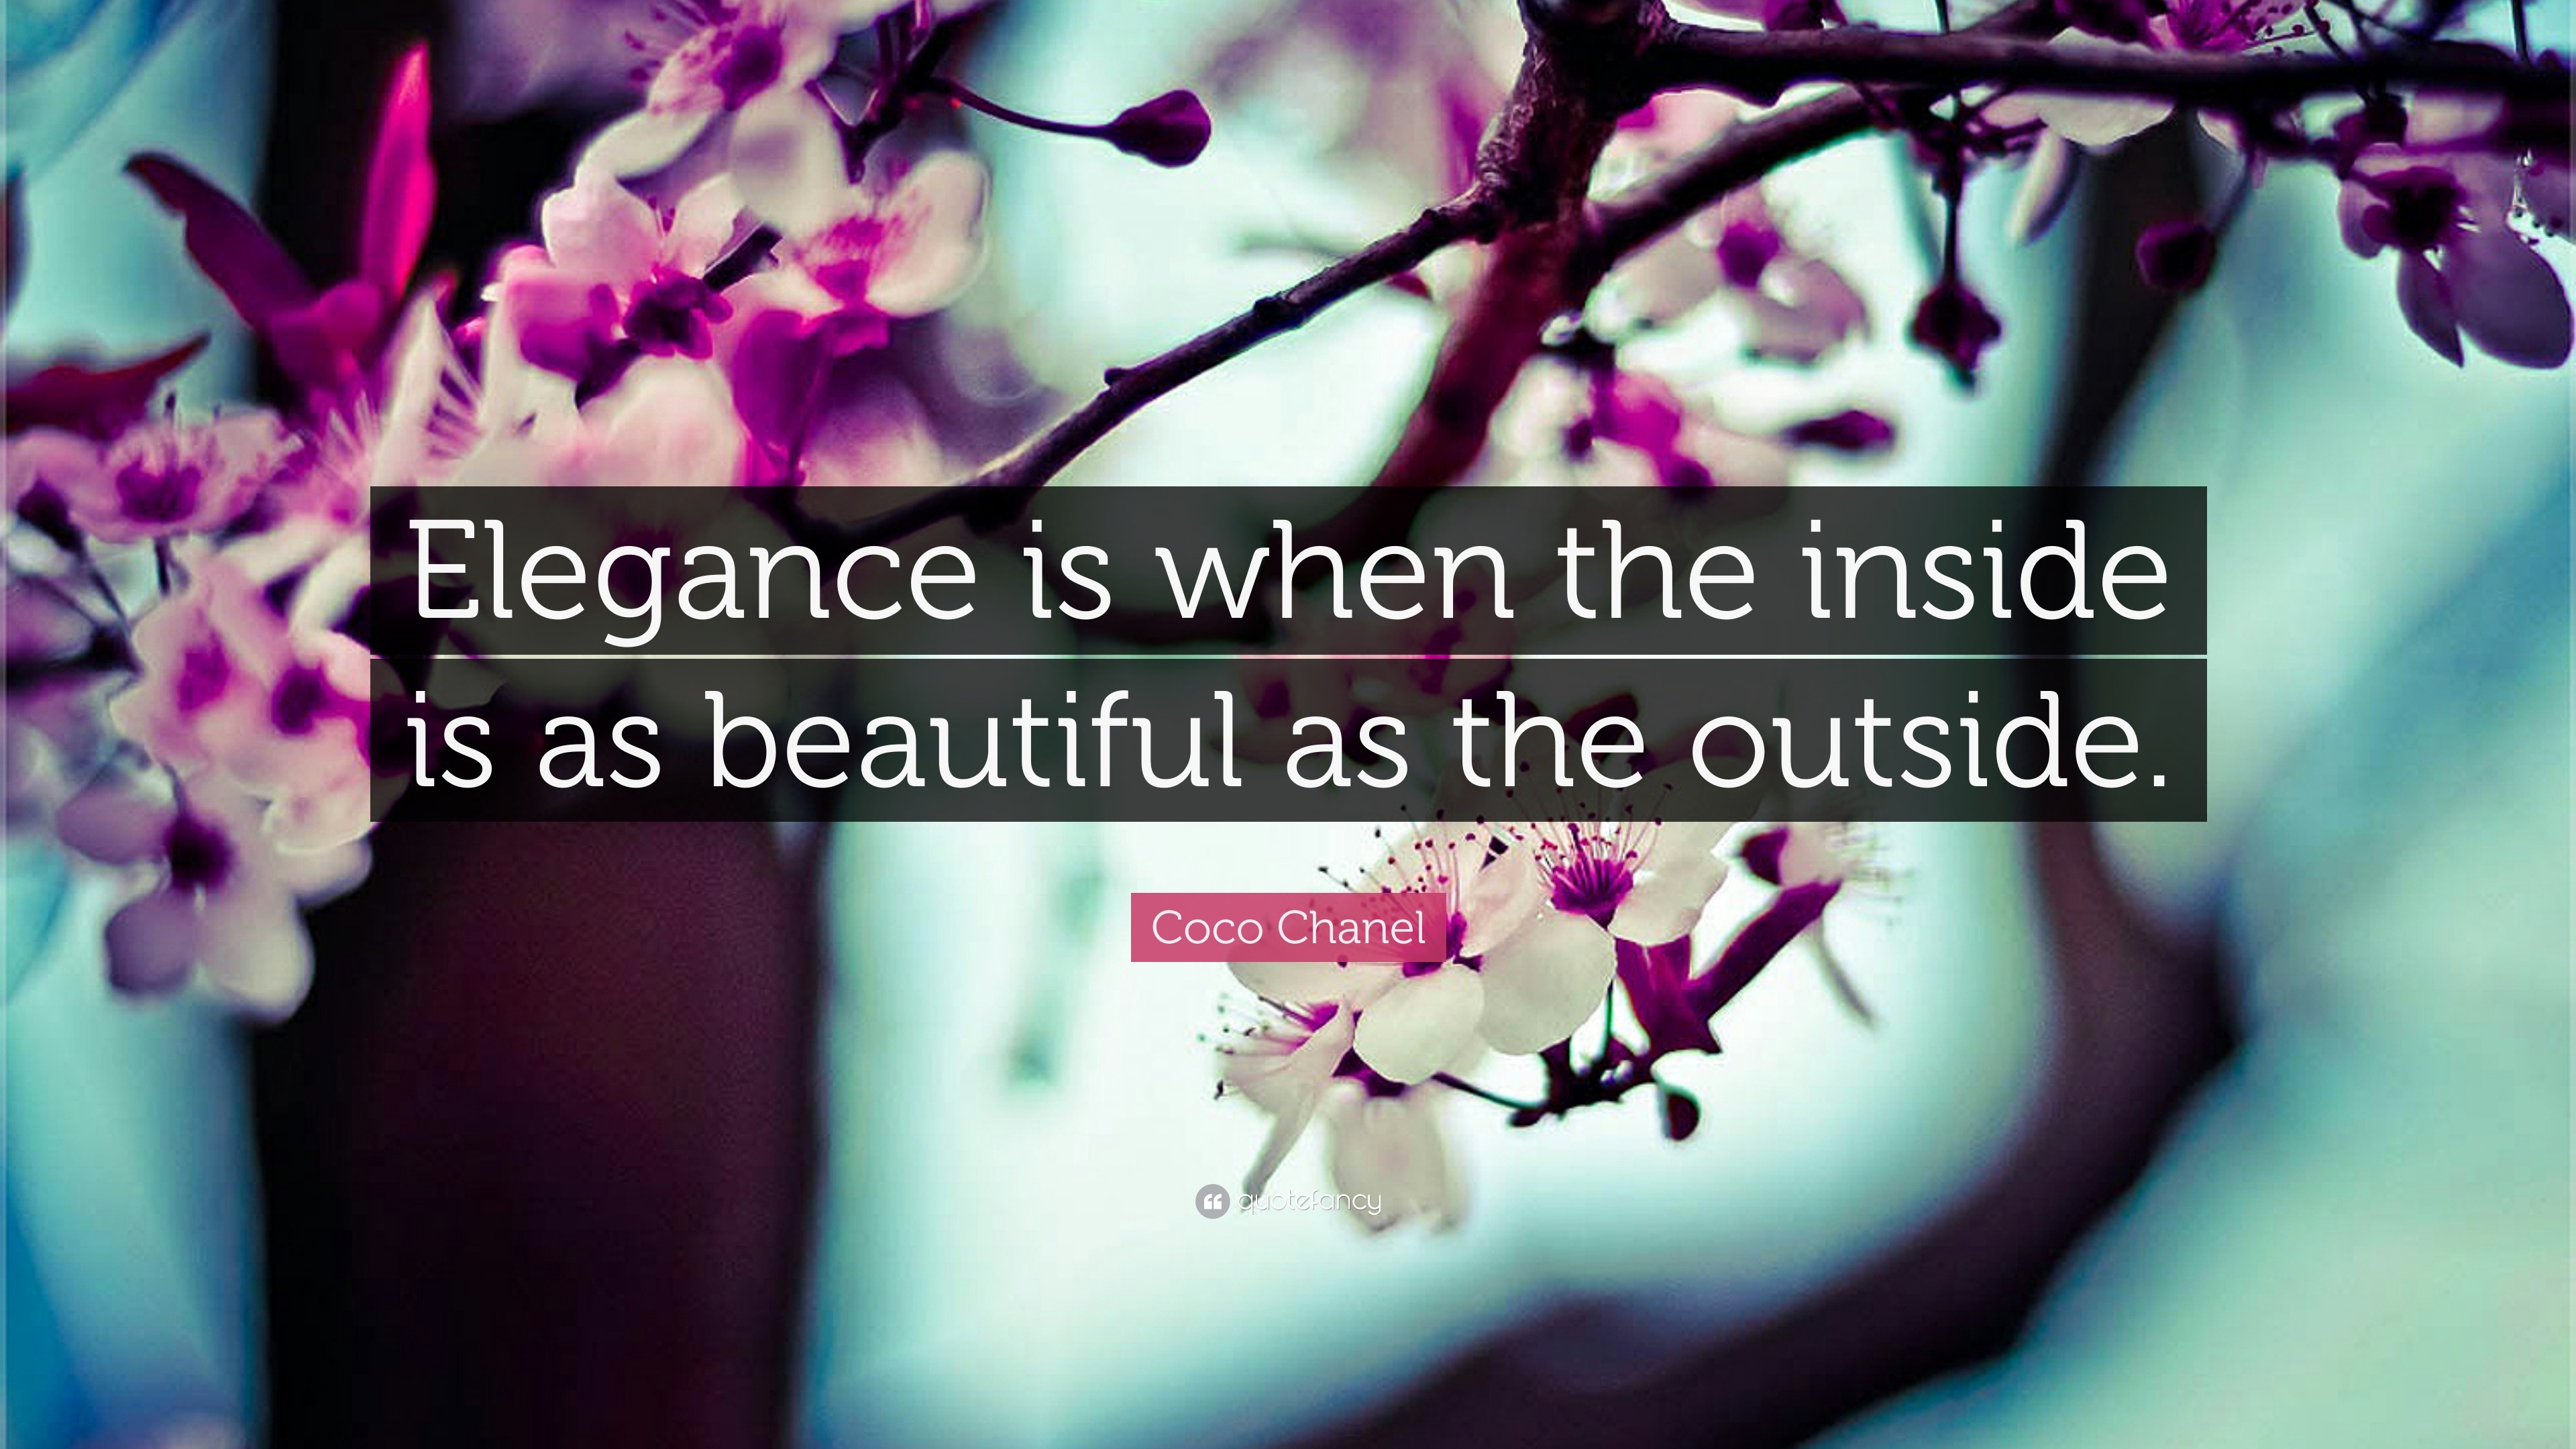 Elegance is when the inside is as Beautiful as the Outside Quote Art Poster  Print - Art Print Studio